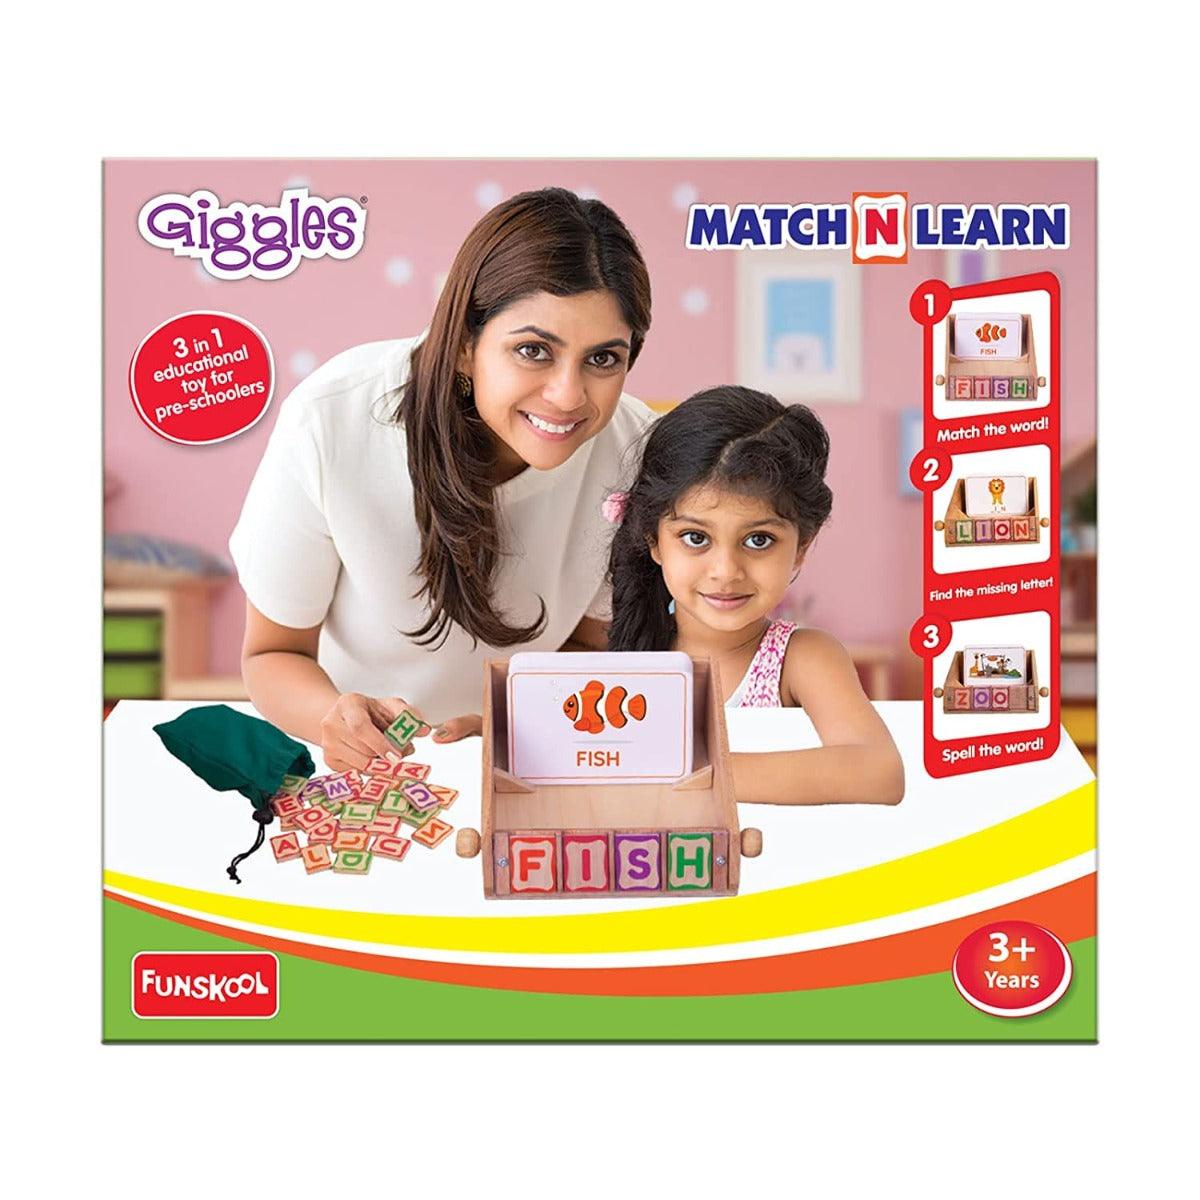 Funskool Giggles Match n Learn - Educational Toy for Ages 3-12 Years